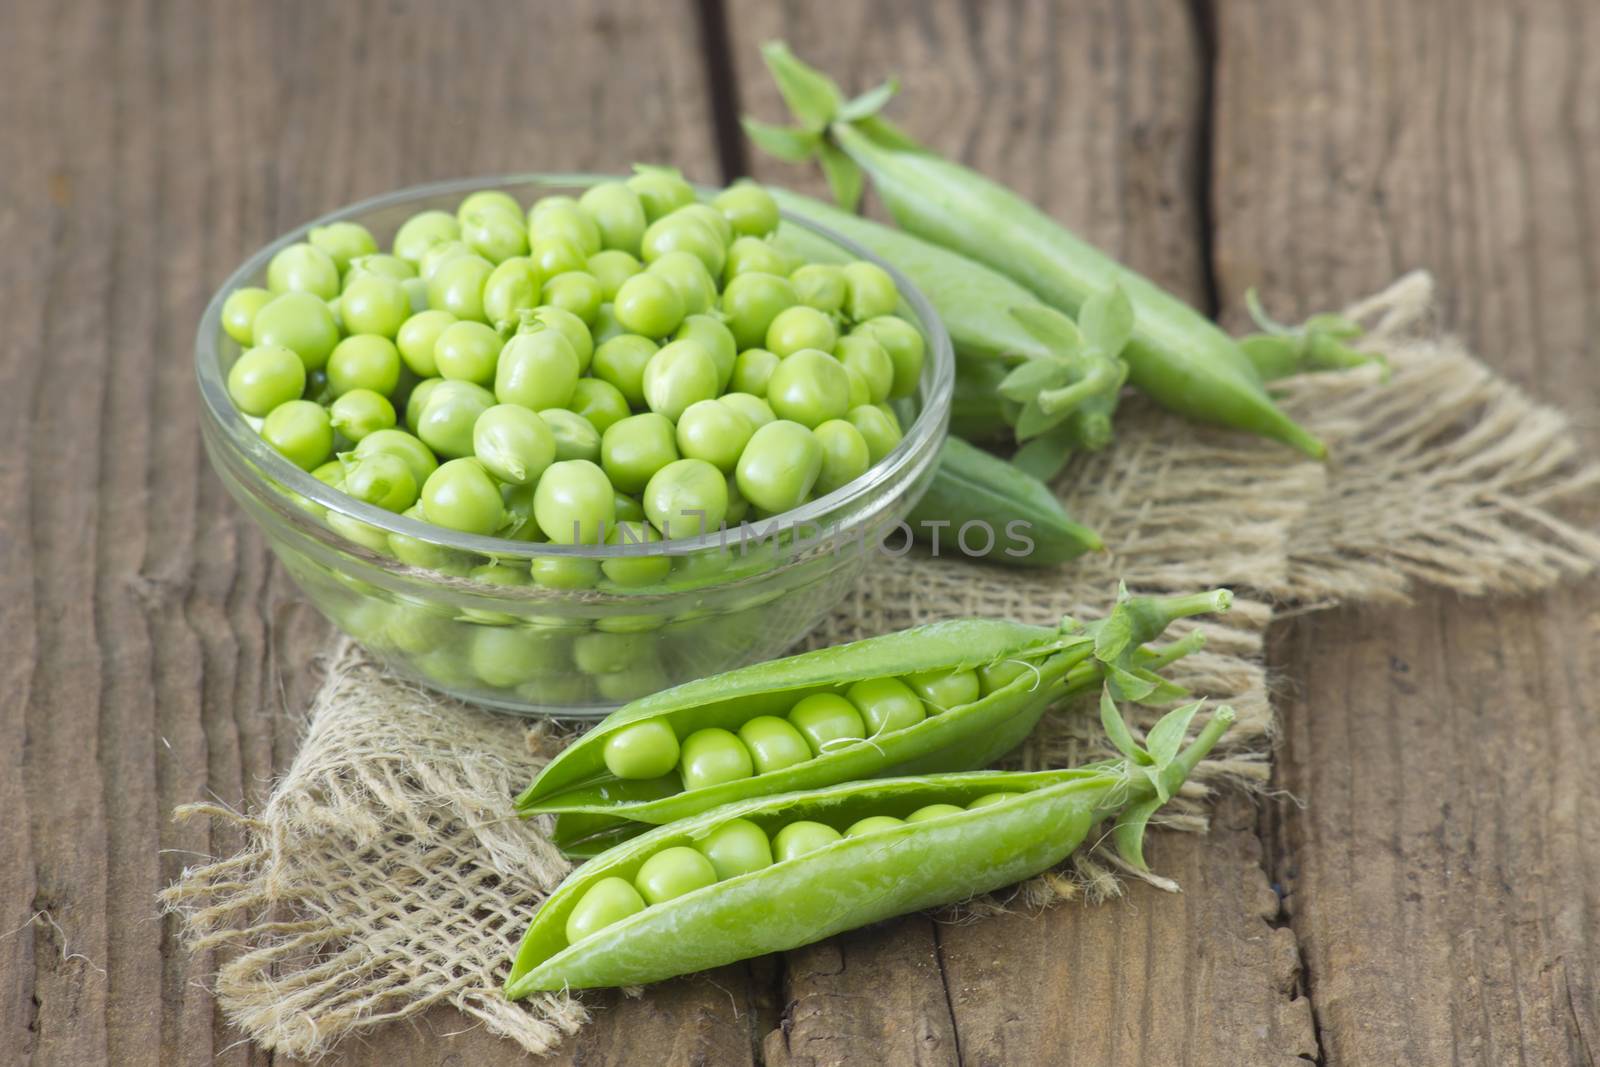 a bowl full of green peas on wooden background by miradrozdowski